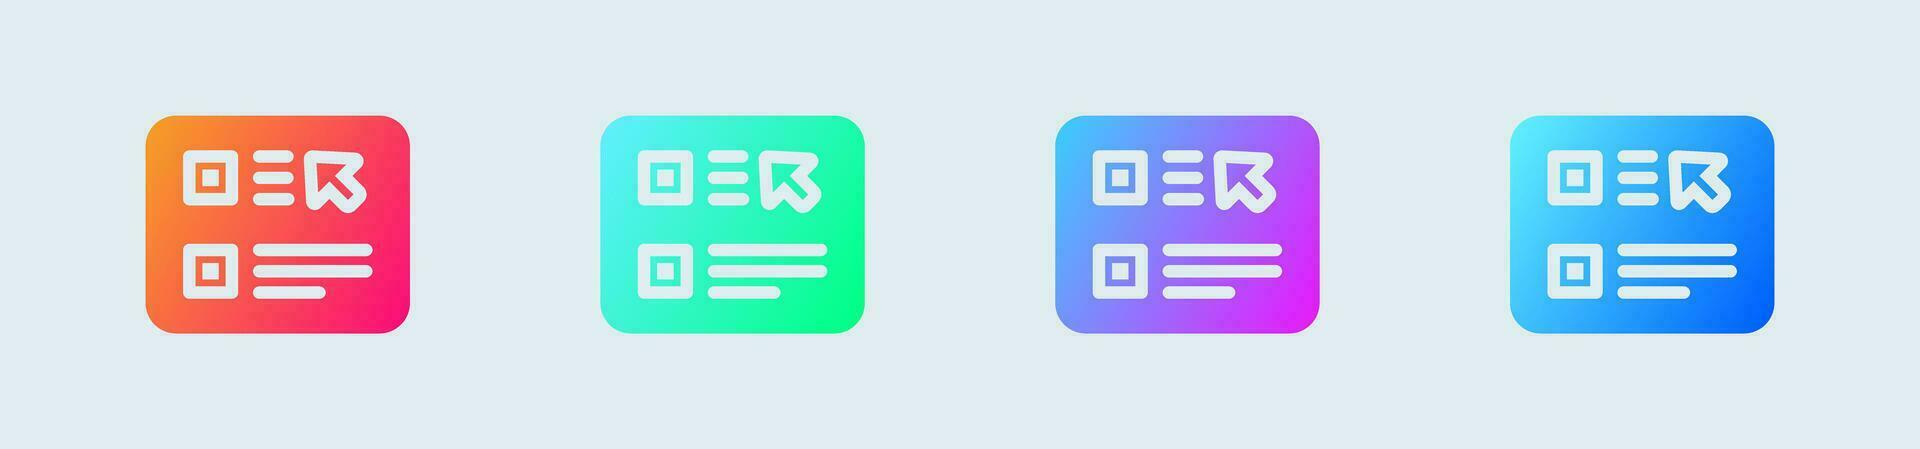 Choice solid icon in gradient colors. Choose button signs vector illustration.